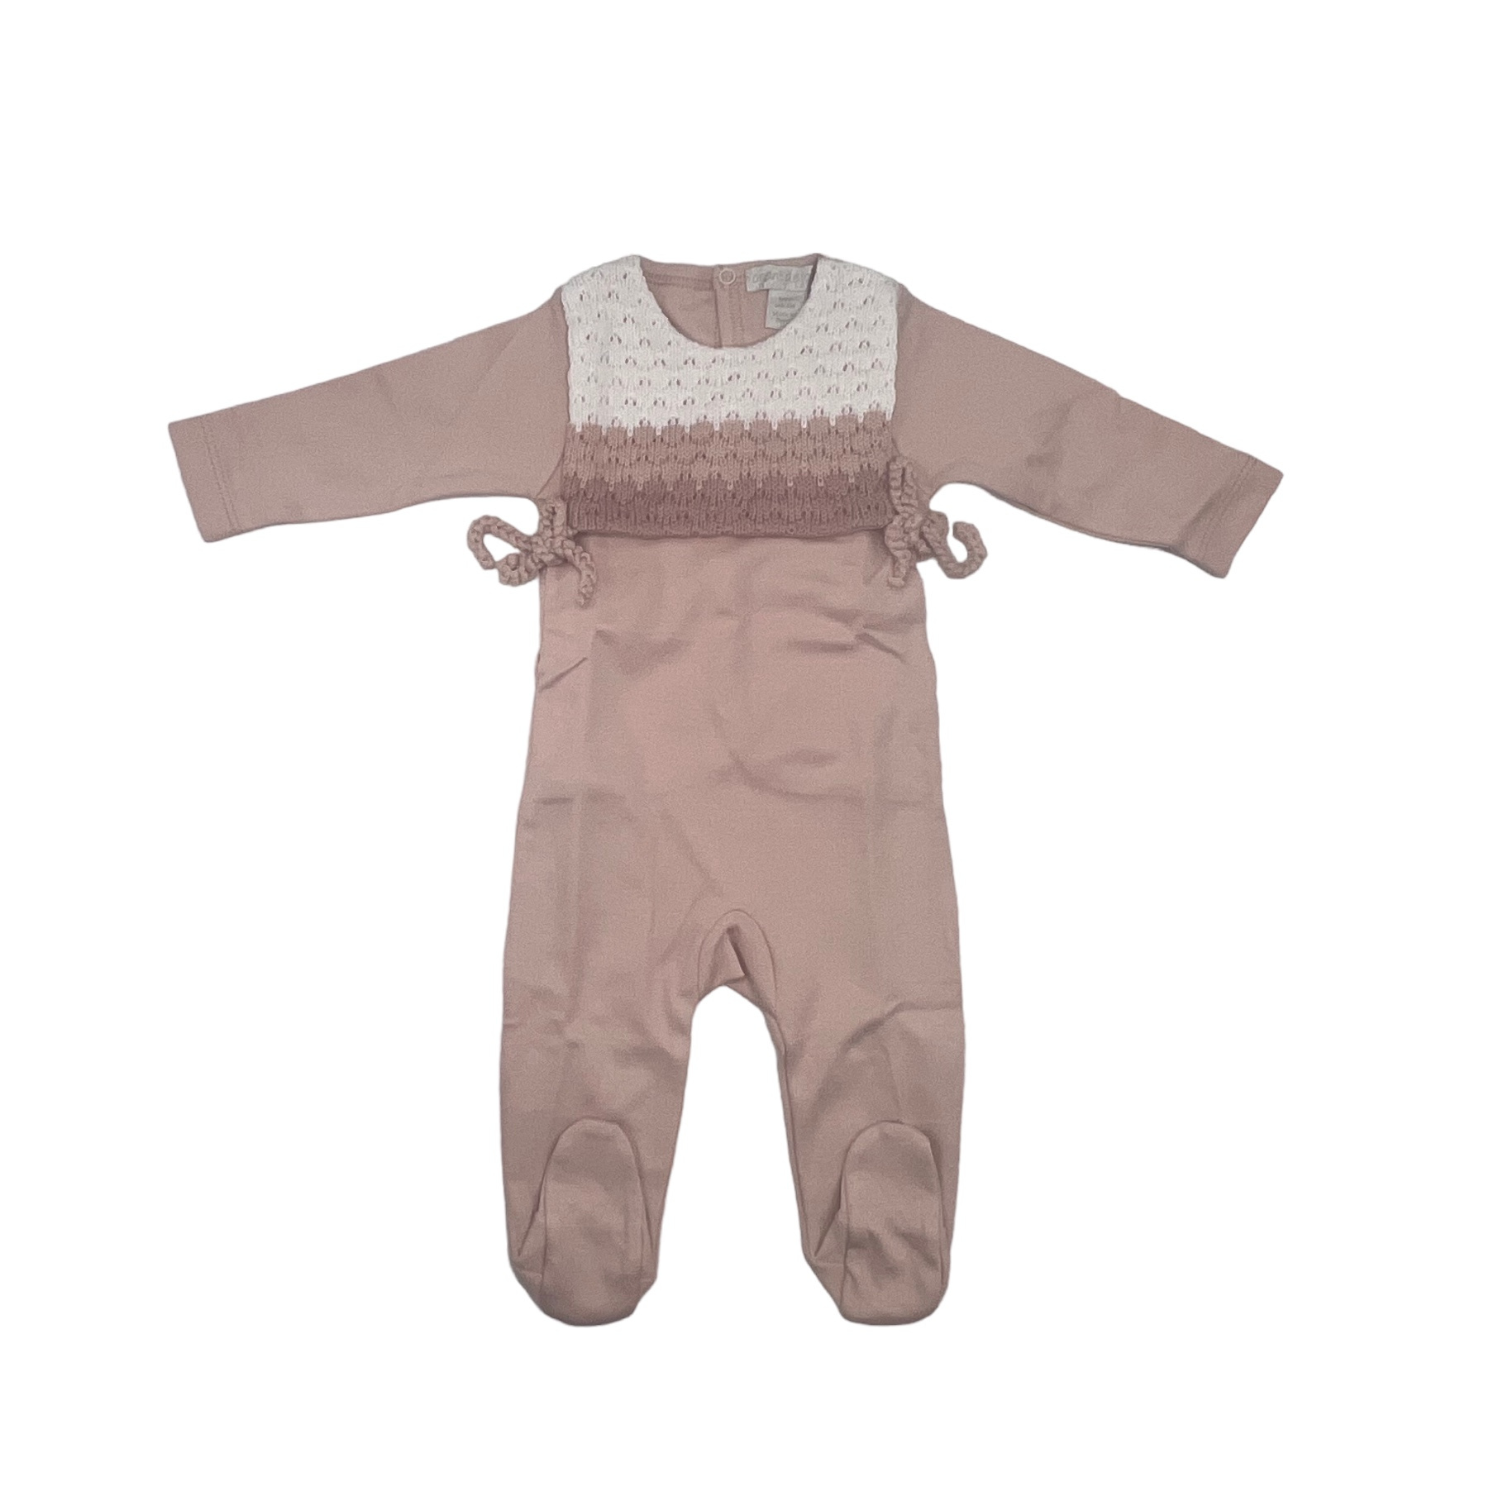 Chant De Joie Knitted Footie - Rose/comb